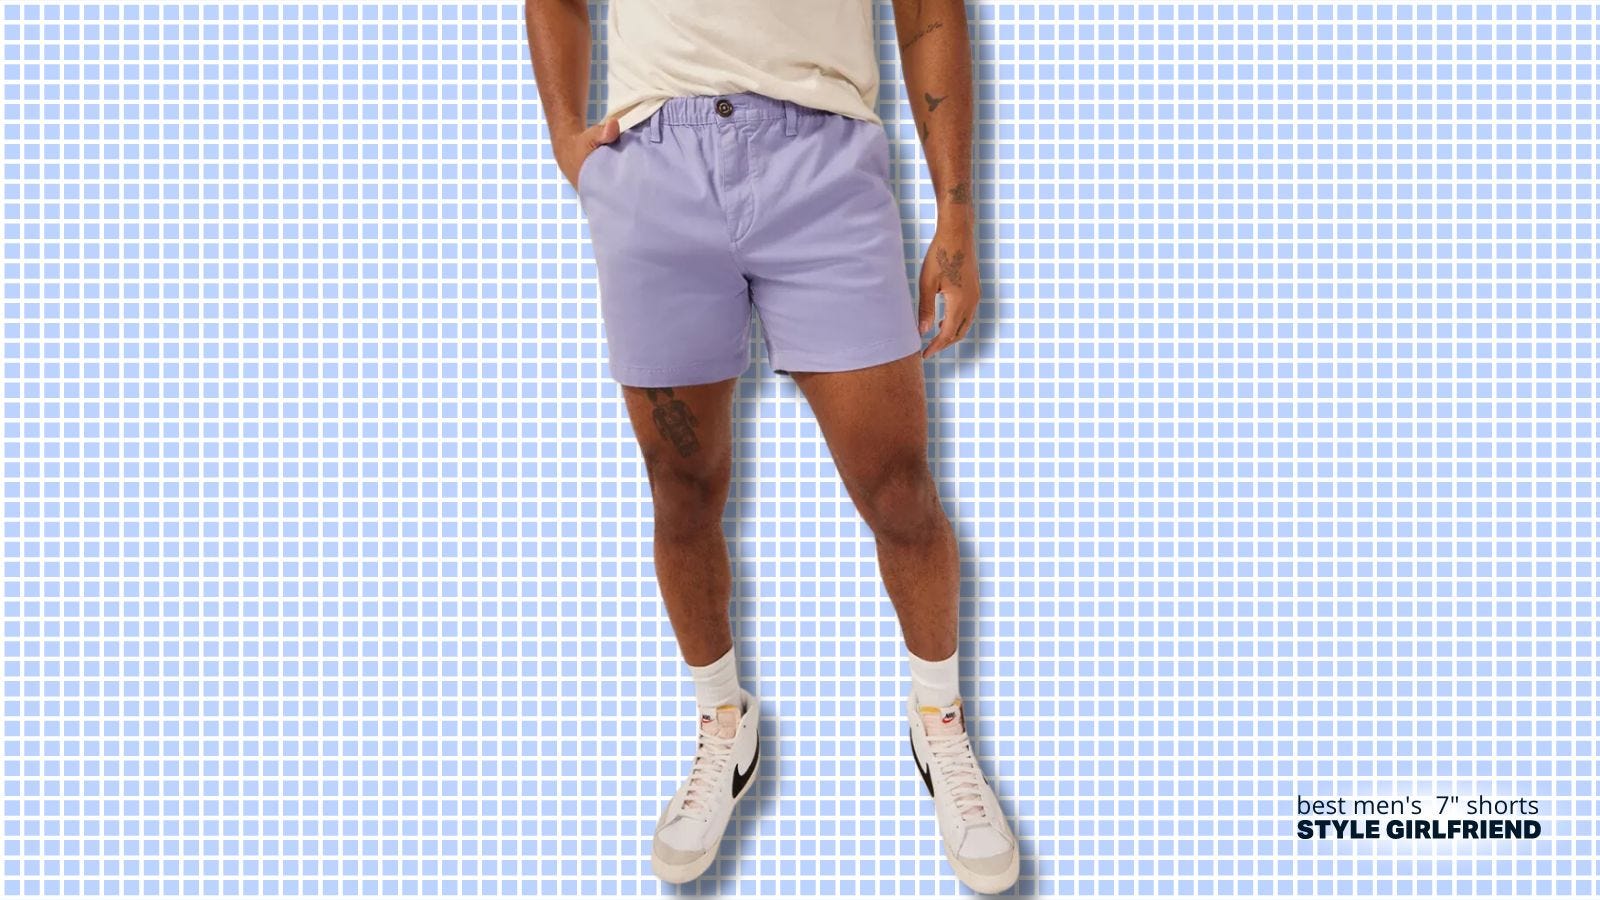 lower half of man wearing cream-colored t-shirt, lavender shorts, with high top nike sneakers 